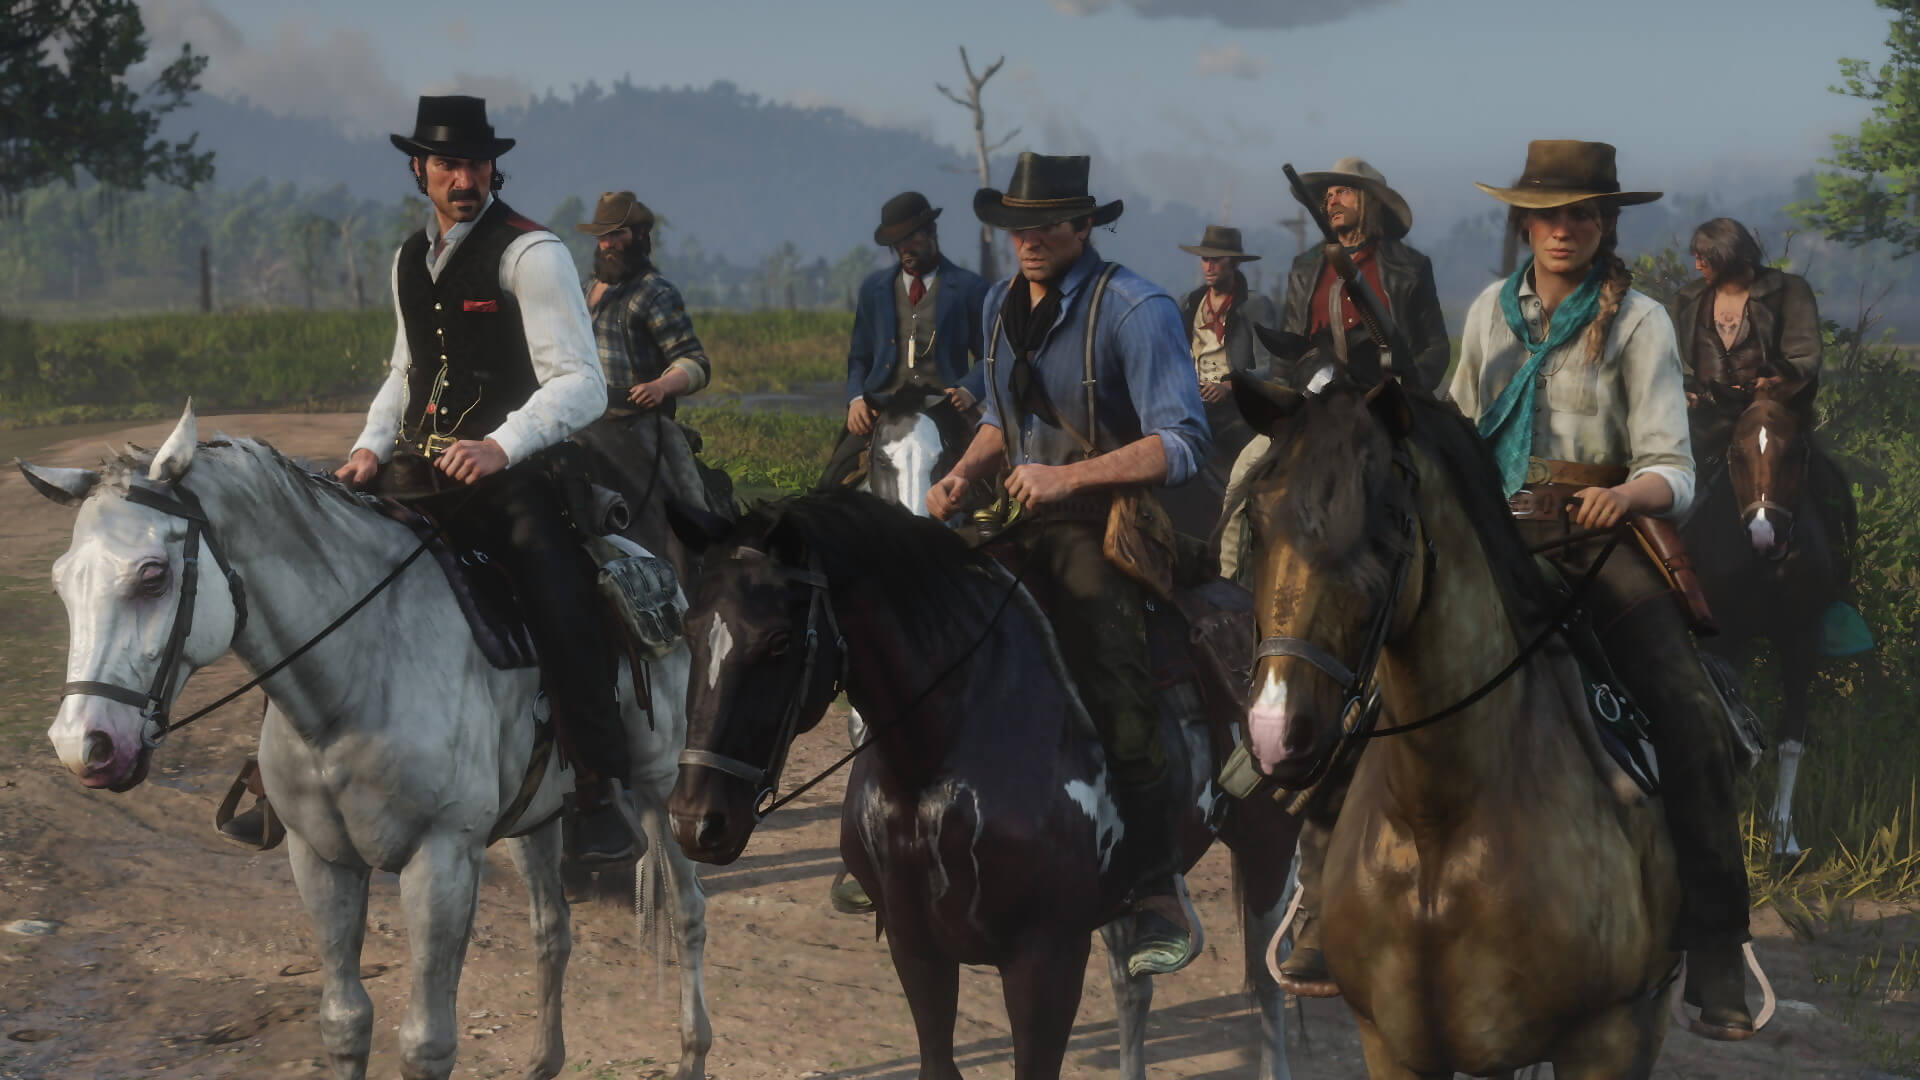 Red Dead Redemption 2 has proven itself immensely popular, yet Rockstar doesn't appear concerned by this phenomenon.